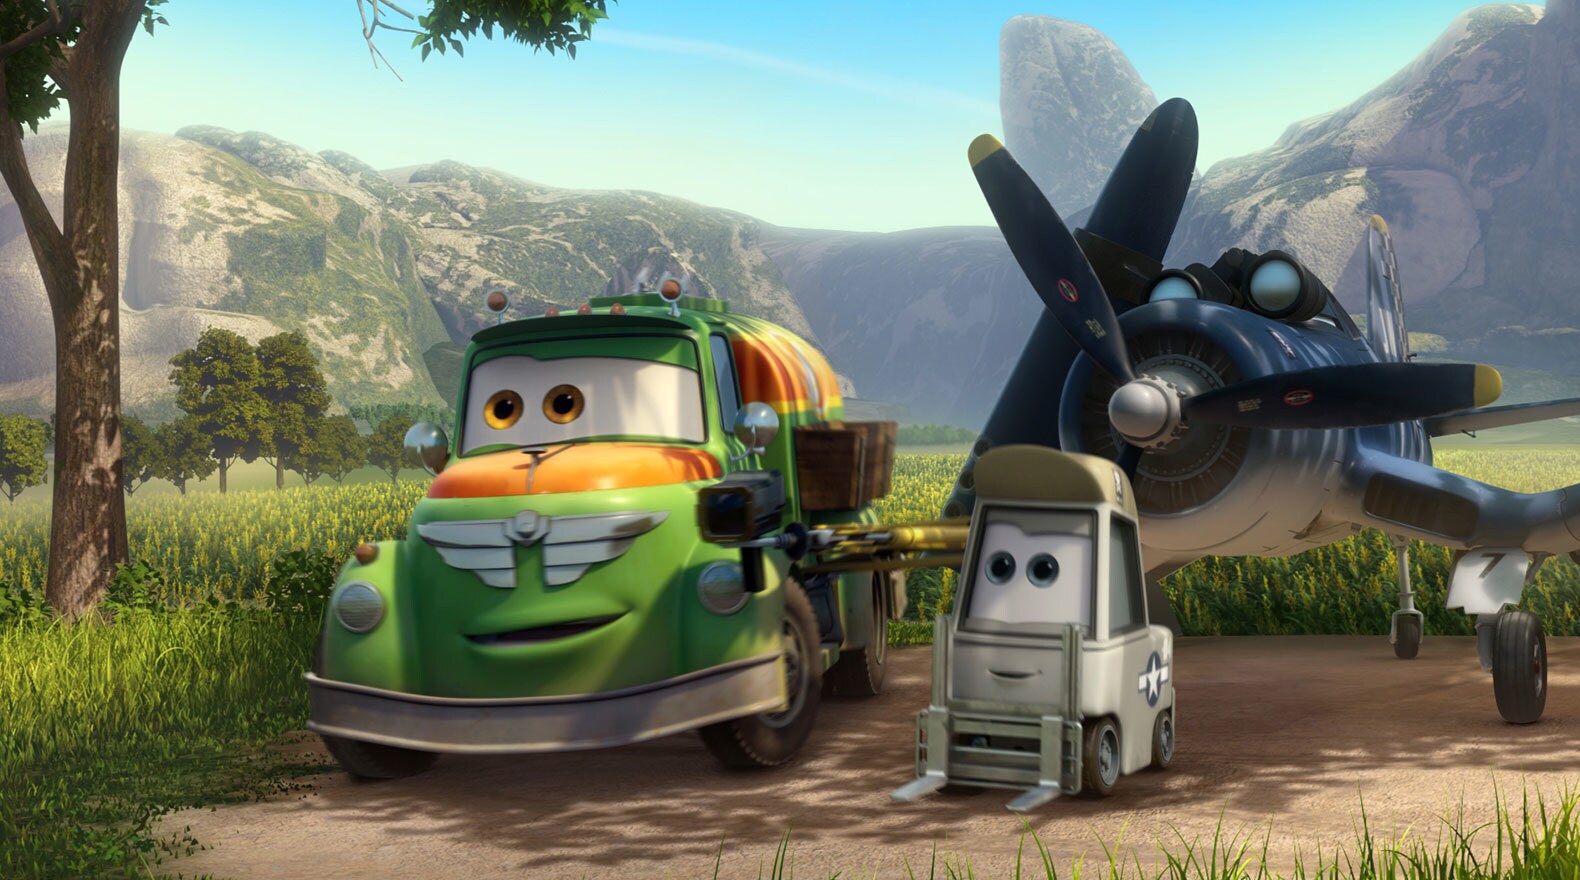 Chug, Sparky and Skipper watch from the ground as Dusty trains for his big race, from the movie "Planes"